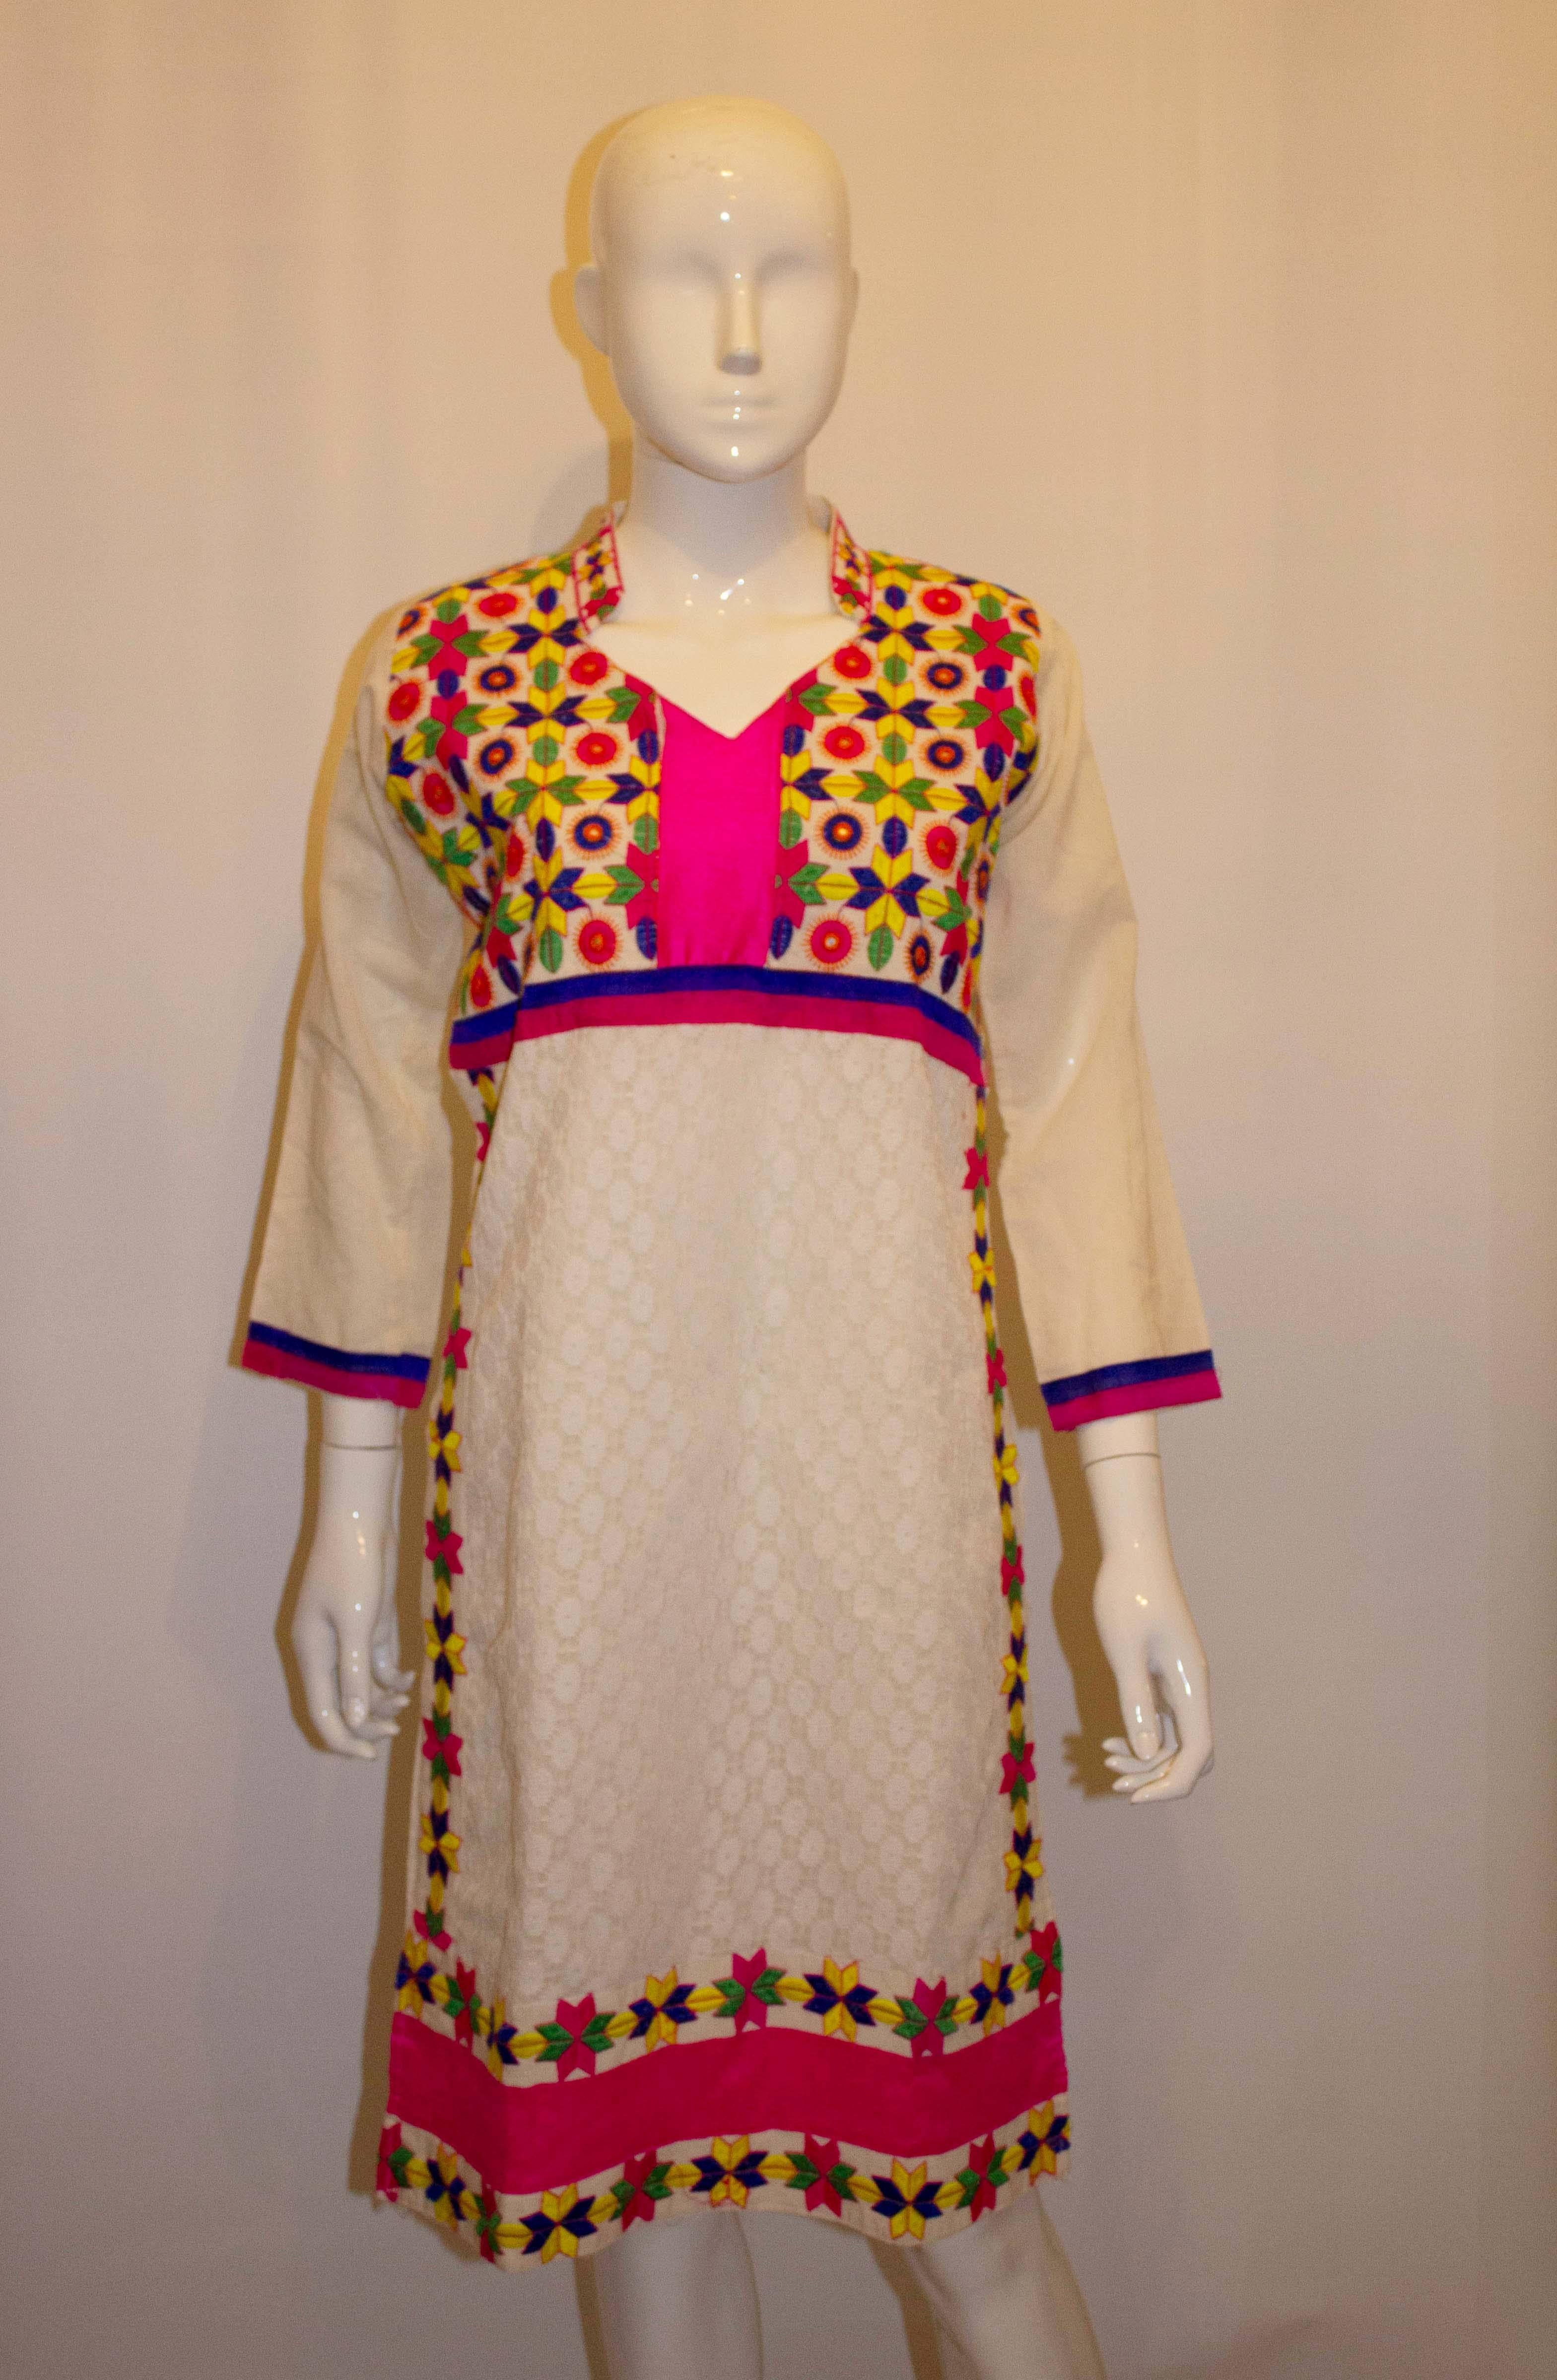 A pretty dress for warm days, with embroidery on the front, and lace detail. The dress has a stand up collar, v neckline, and has 18'' slits on either side. Bust up to 38'',length 40''